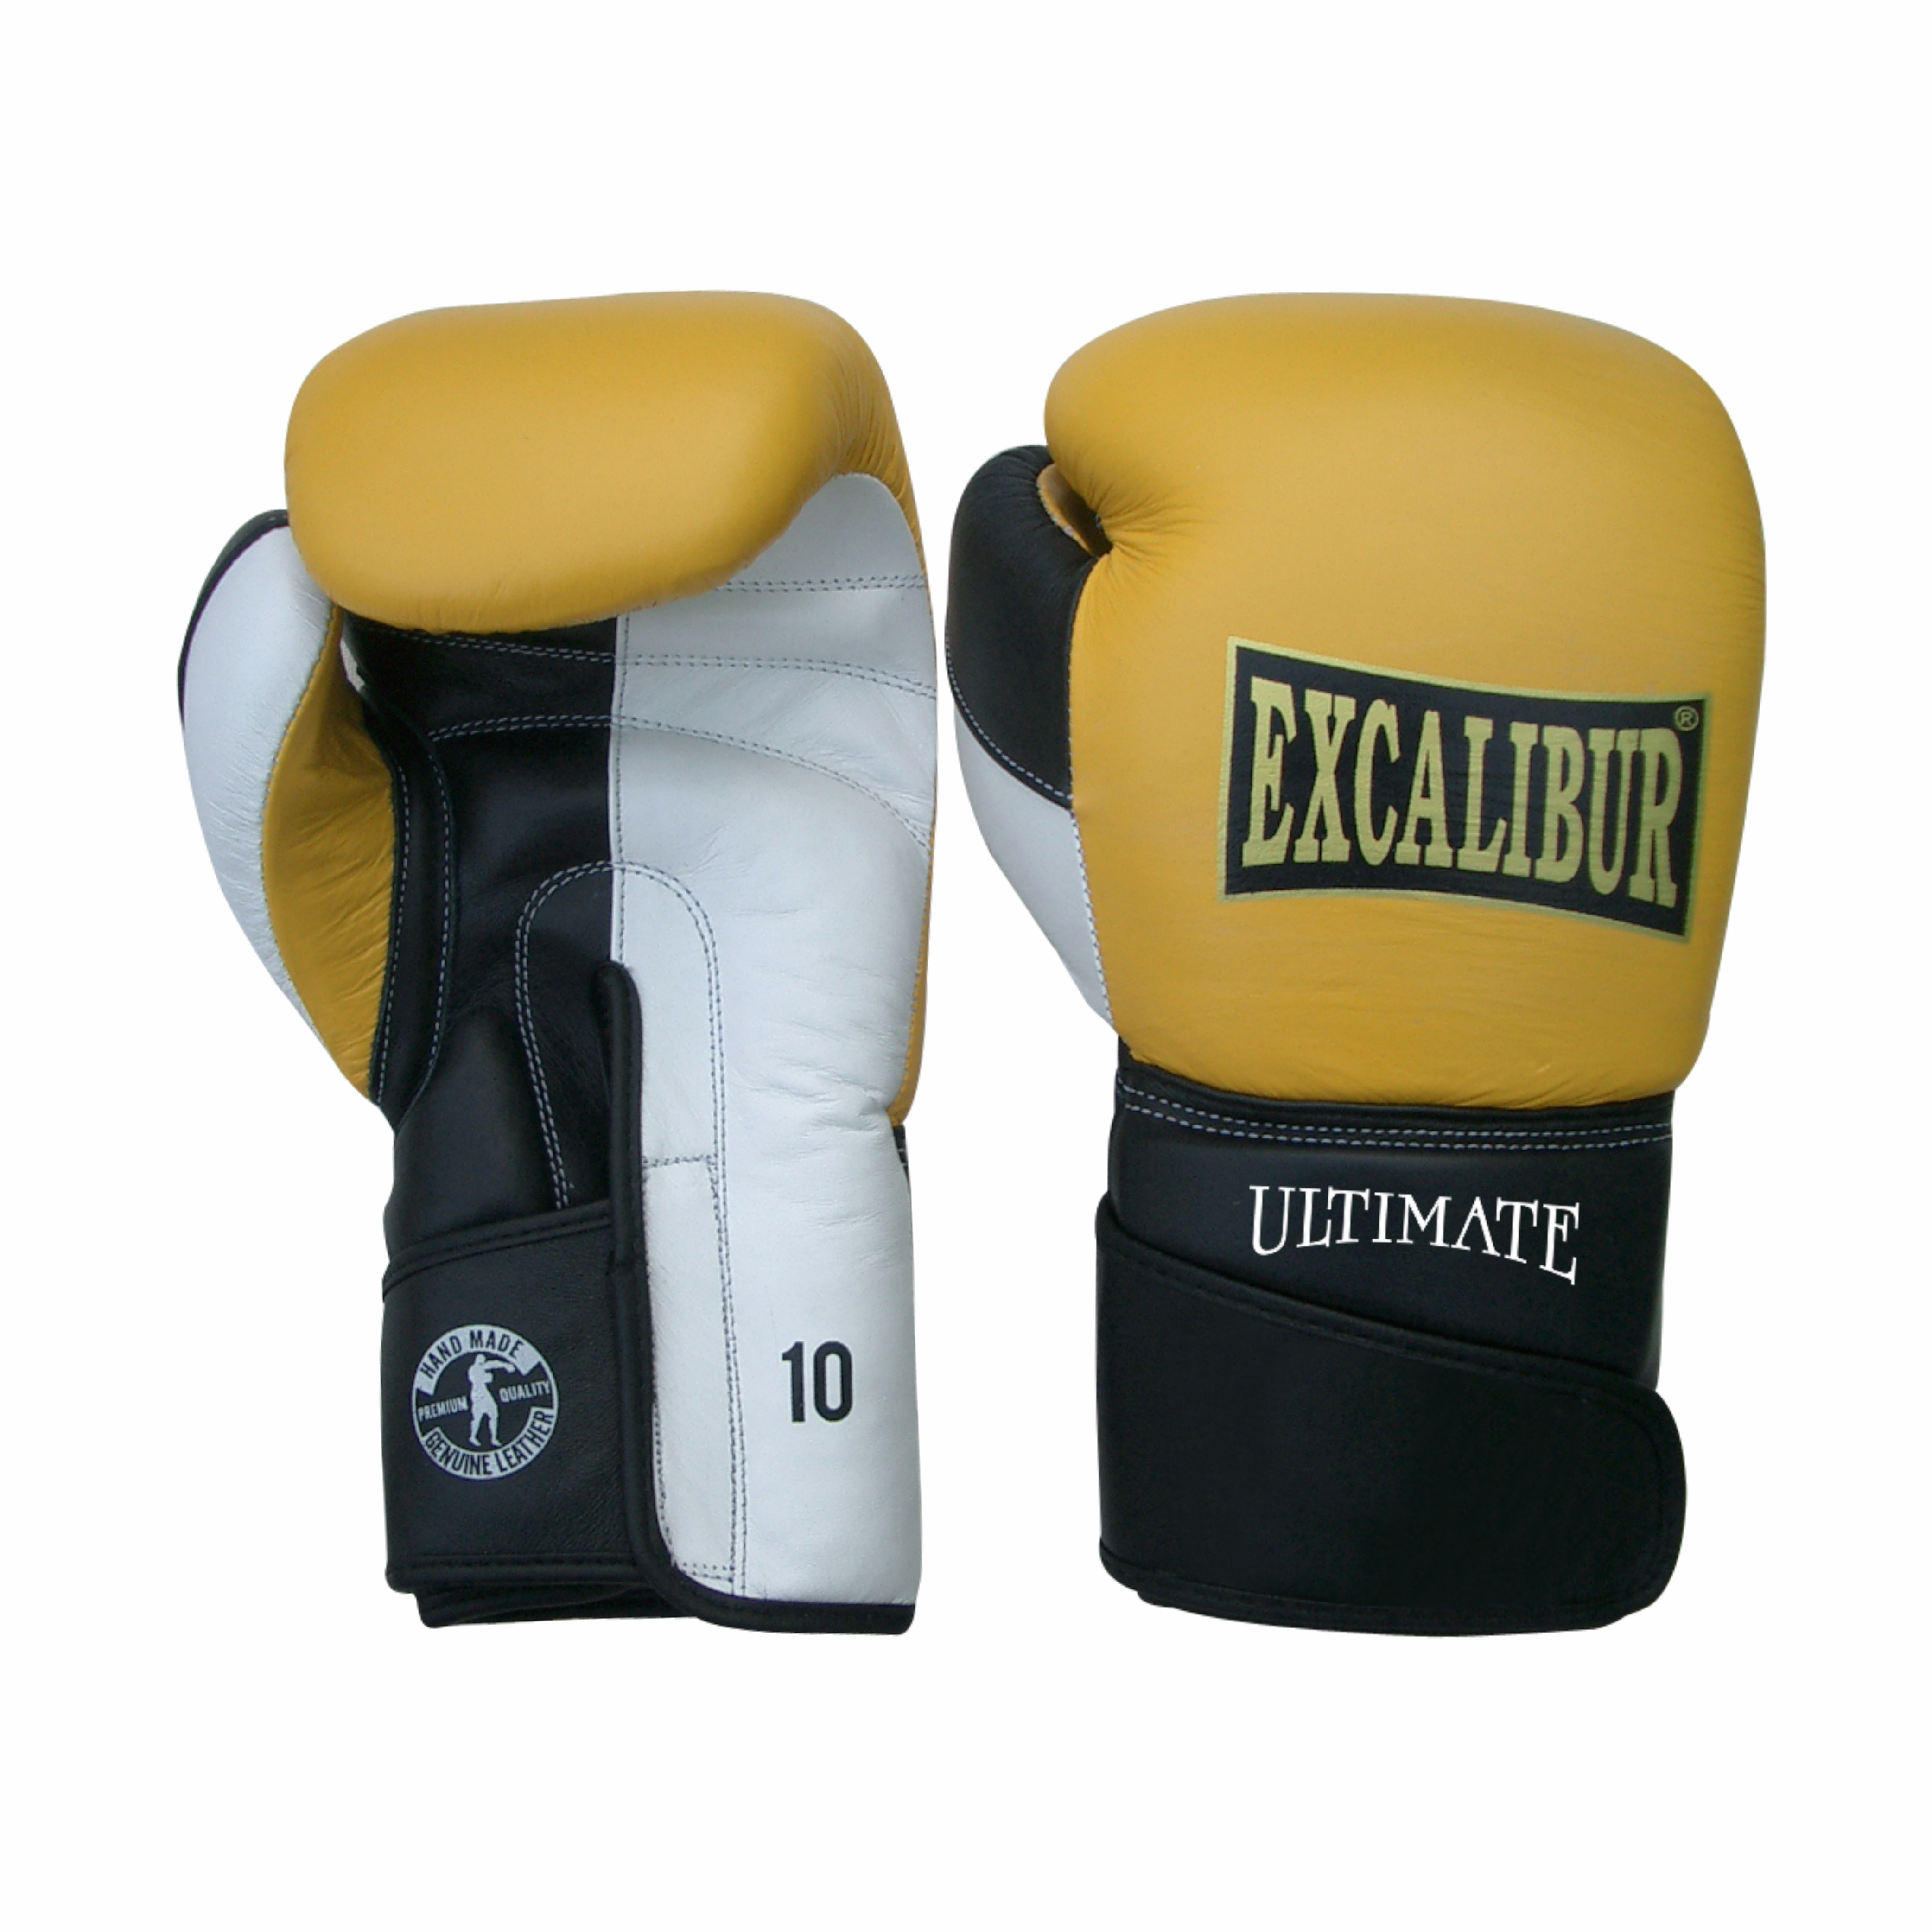 Ultimate Boxing Gloves